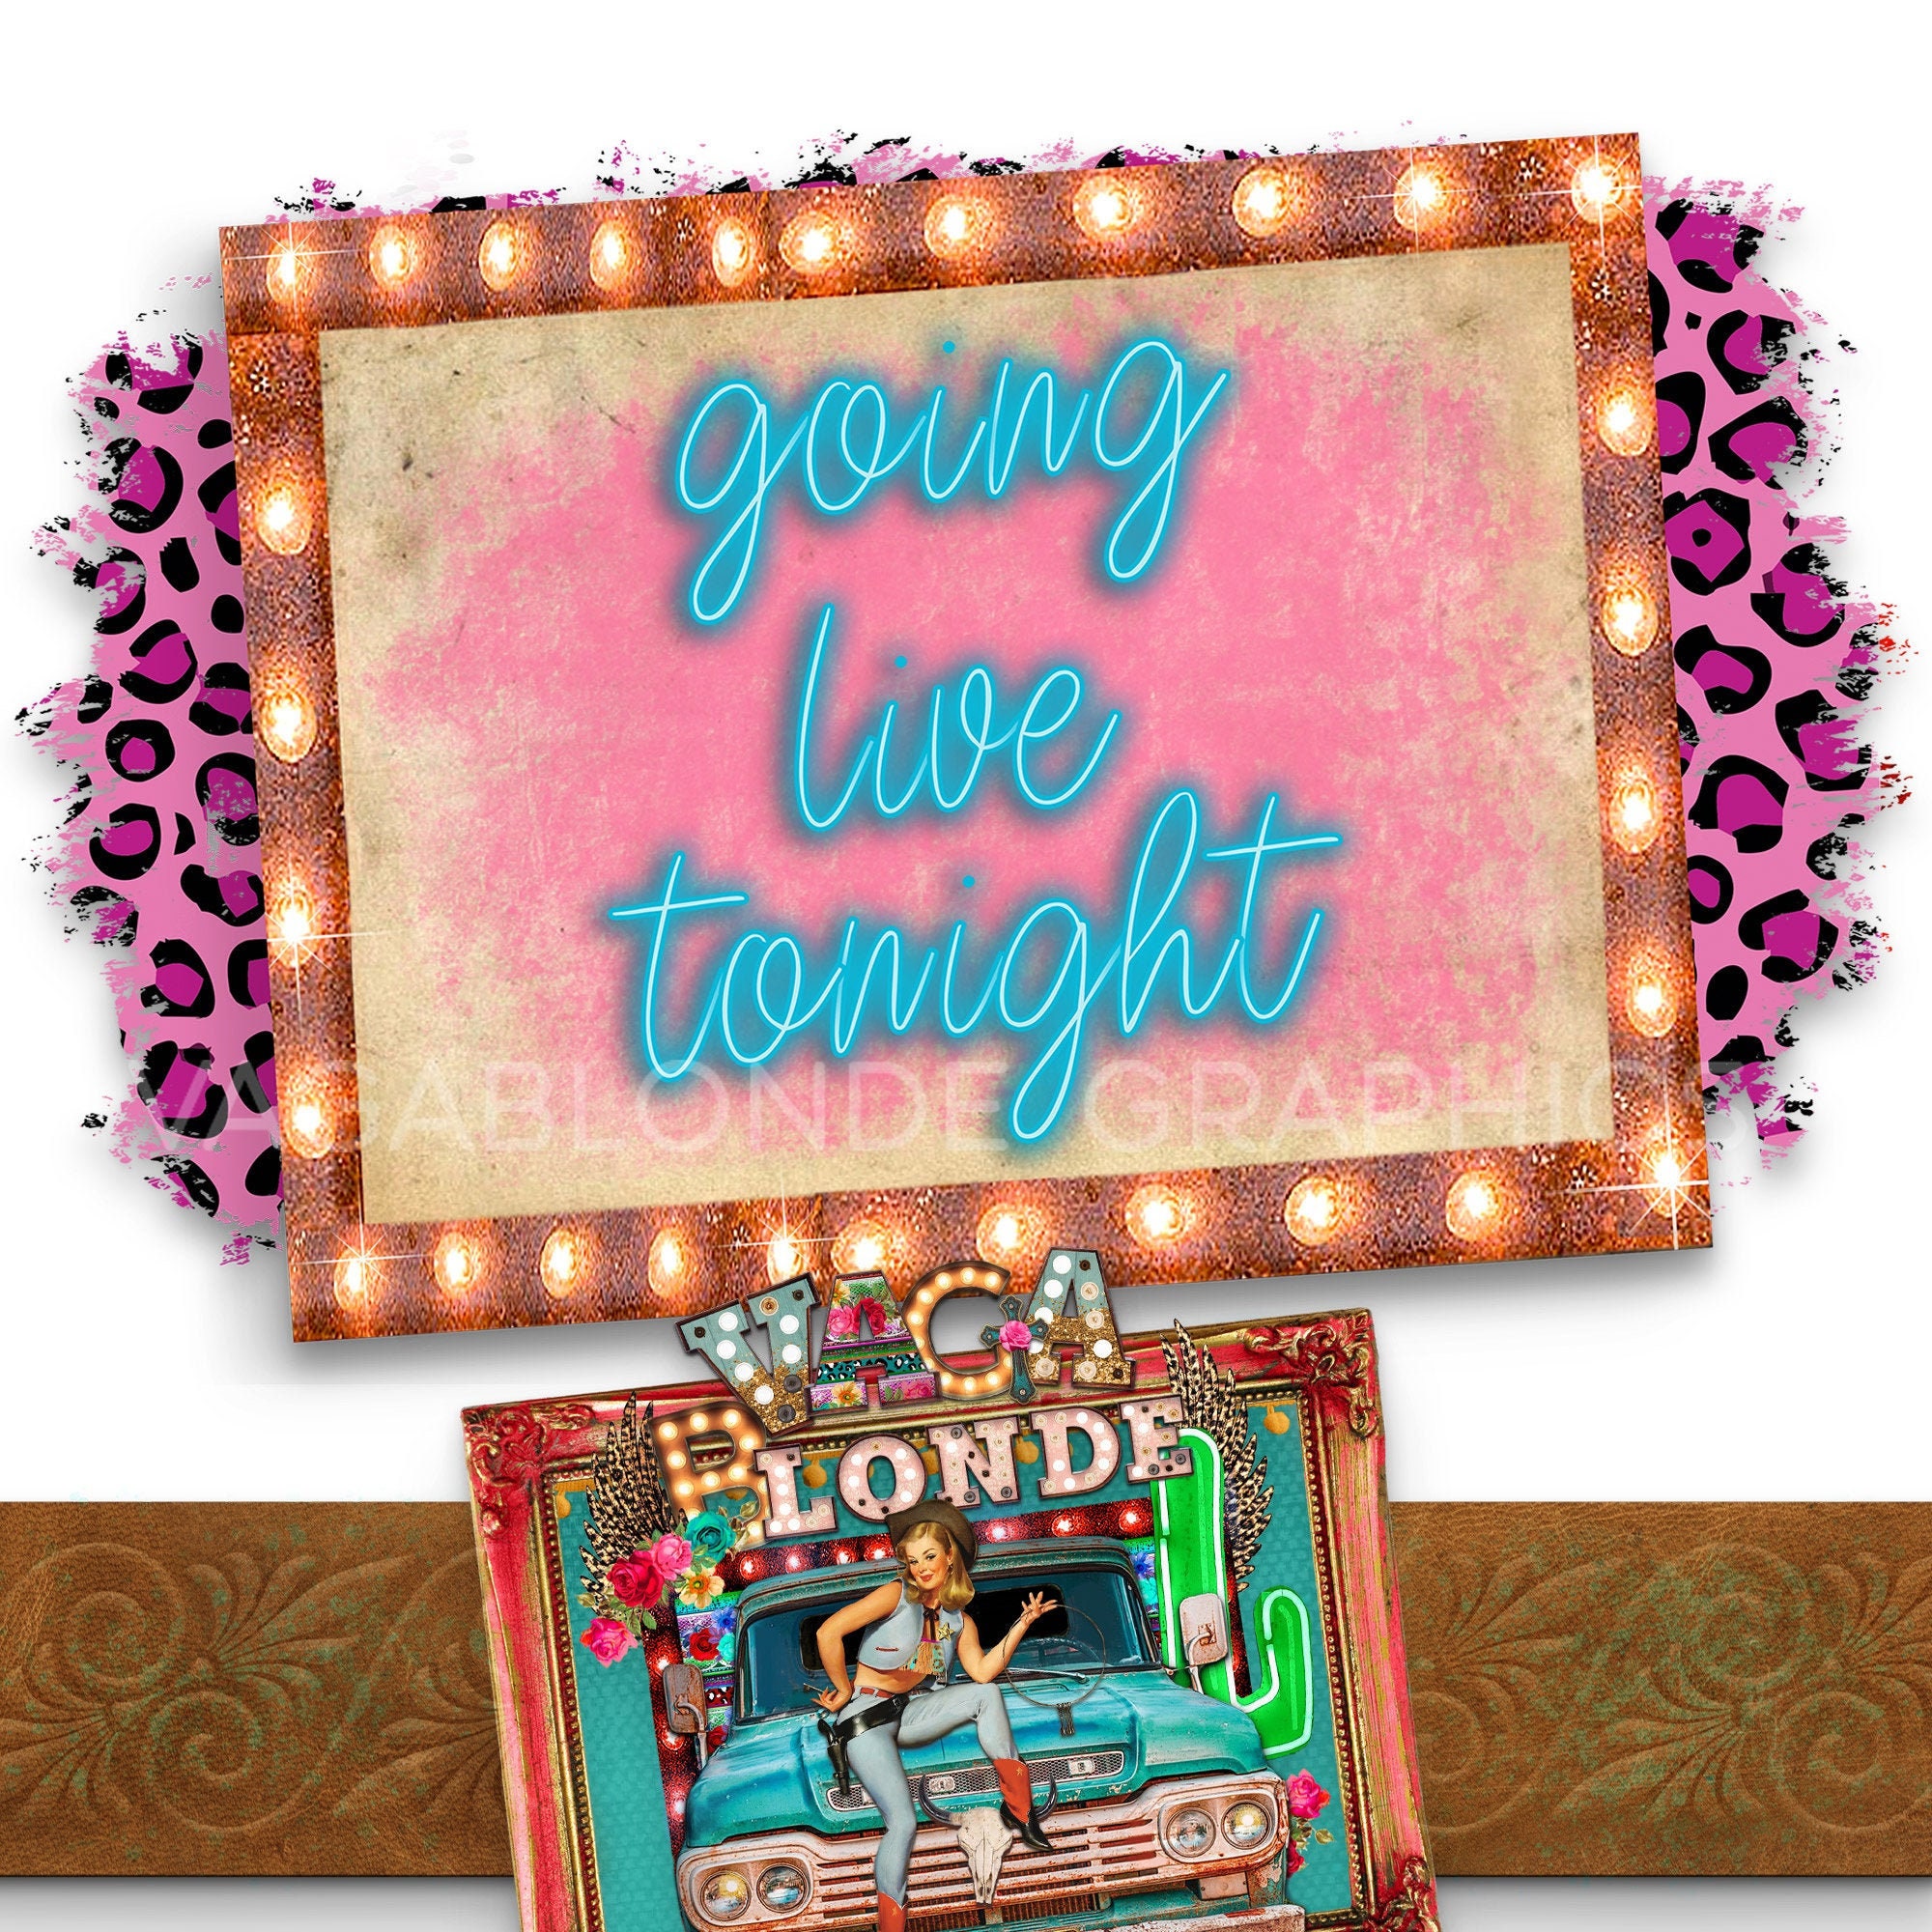 Going Live Tonight Graphic Digital Download Marquee Sale - Etsy